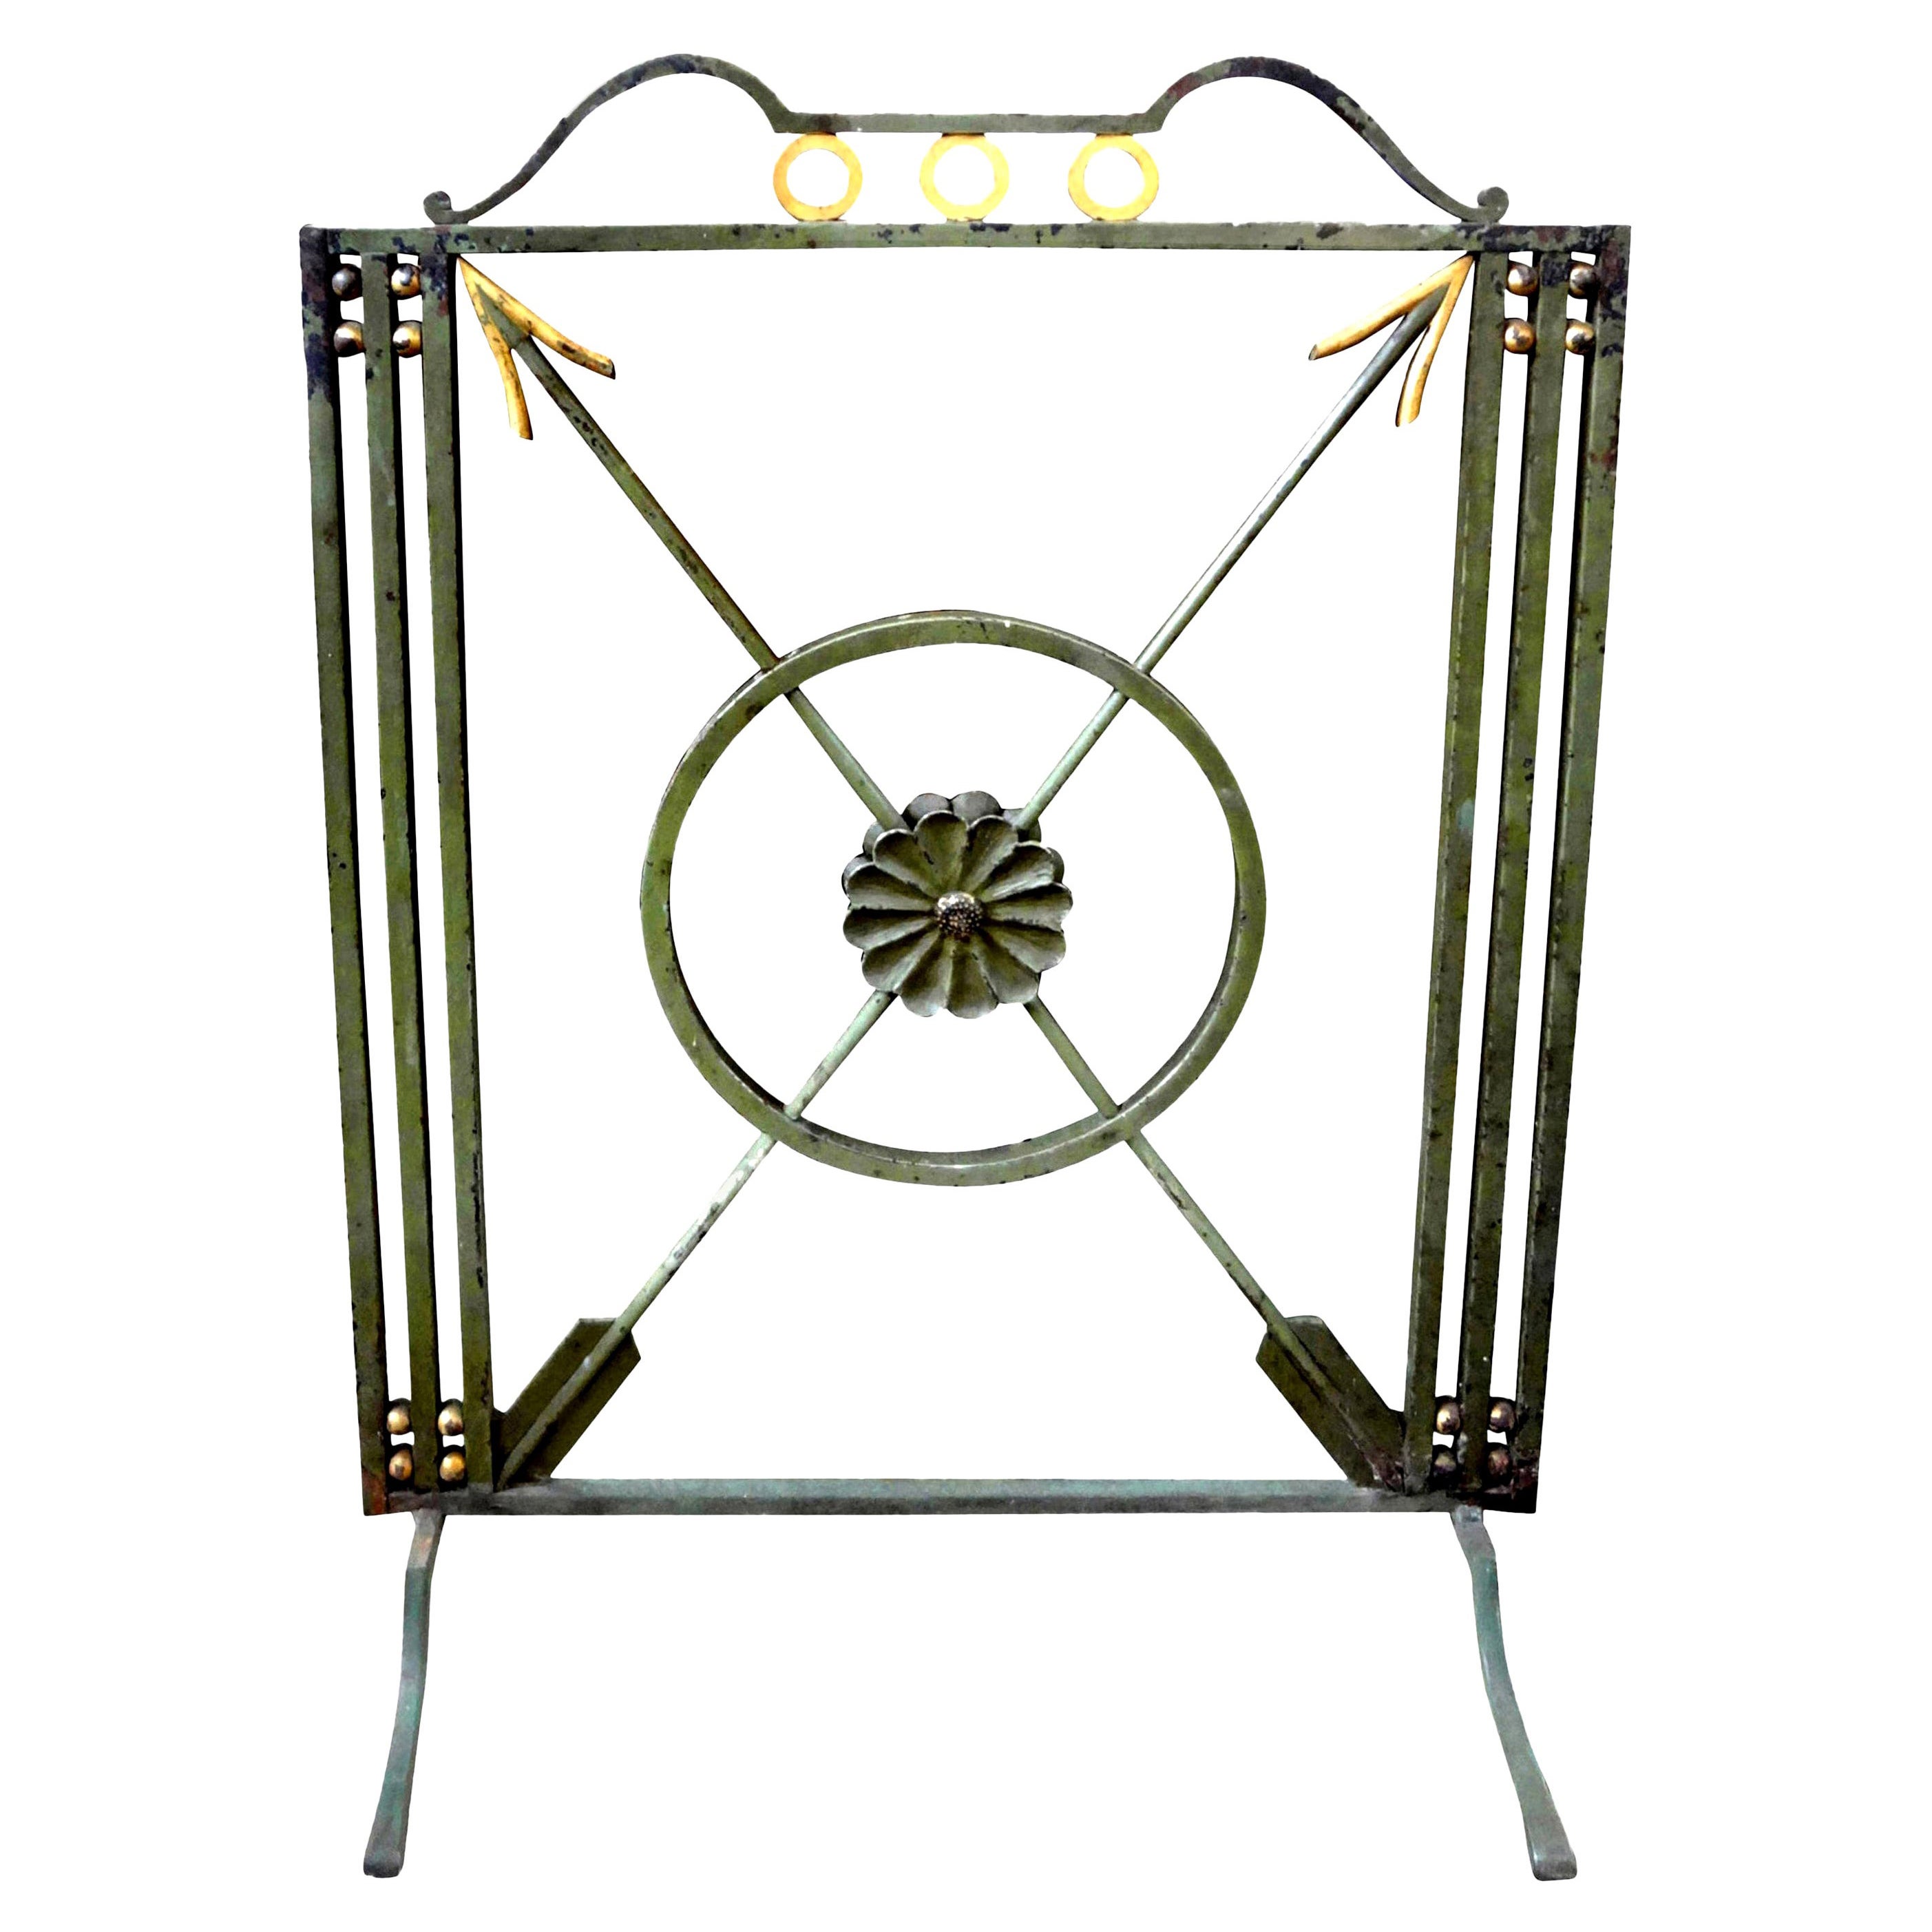 French Art Deco Neoclassical Style Wrought Iron Fireplace Screen with Arrows